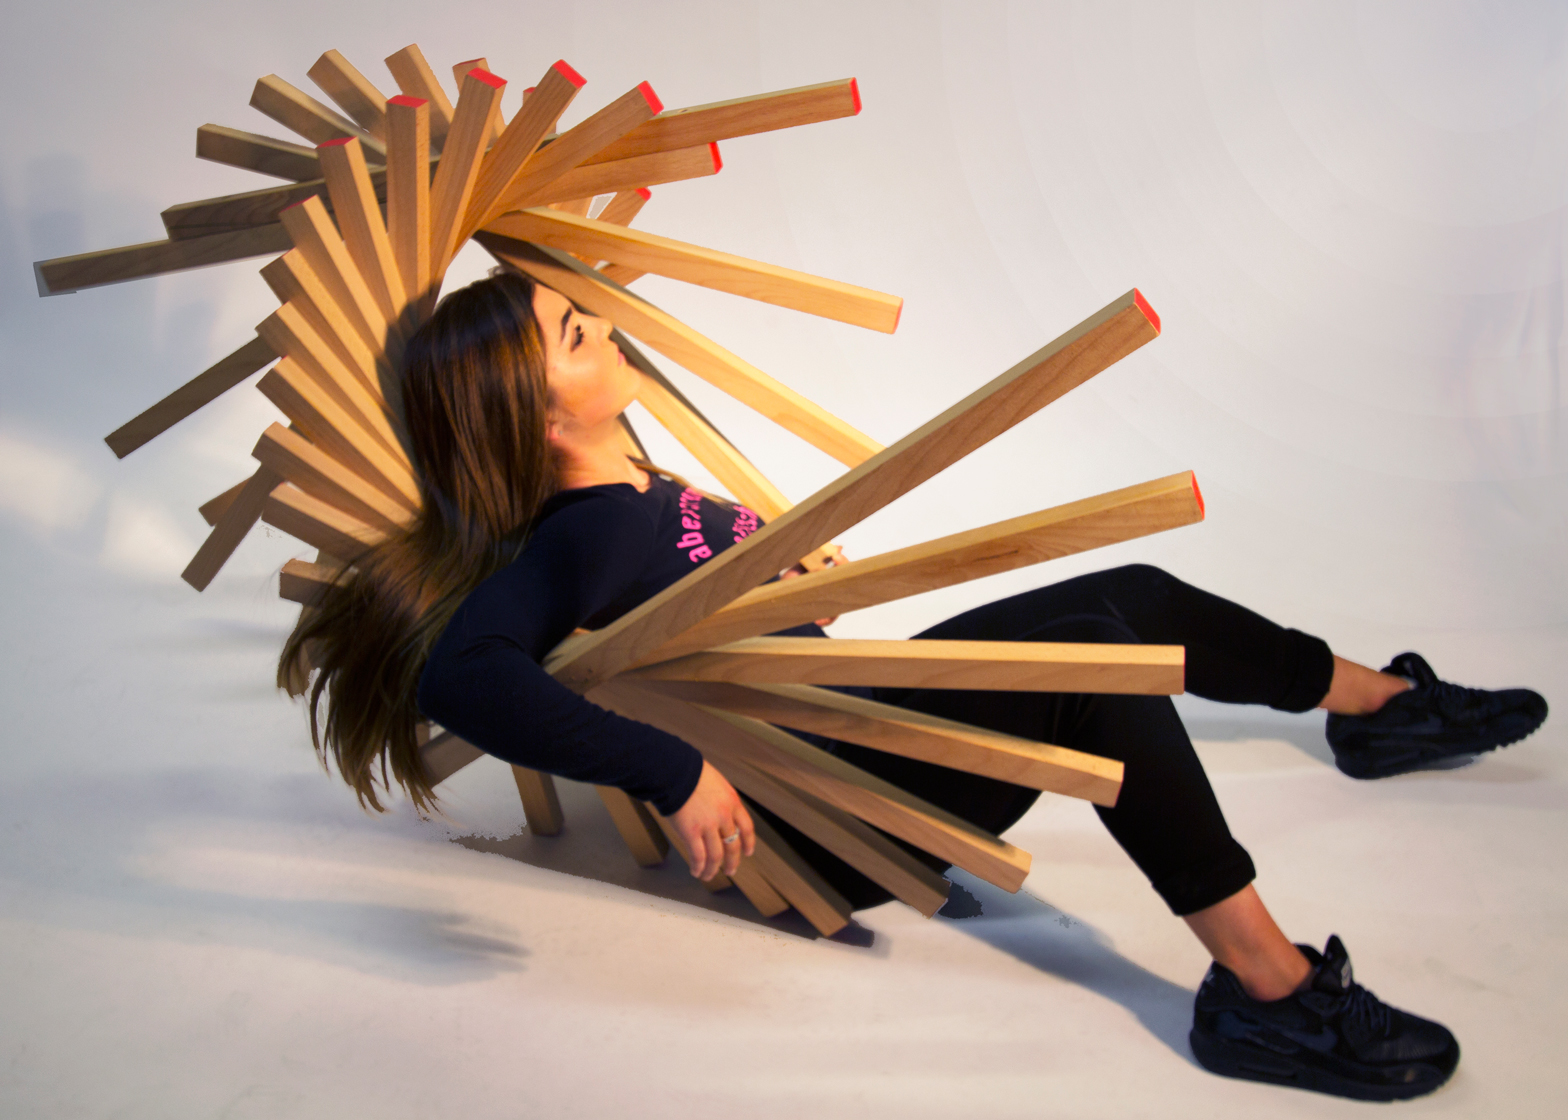 Disposture chair forces sitters into an uncomfortable slump